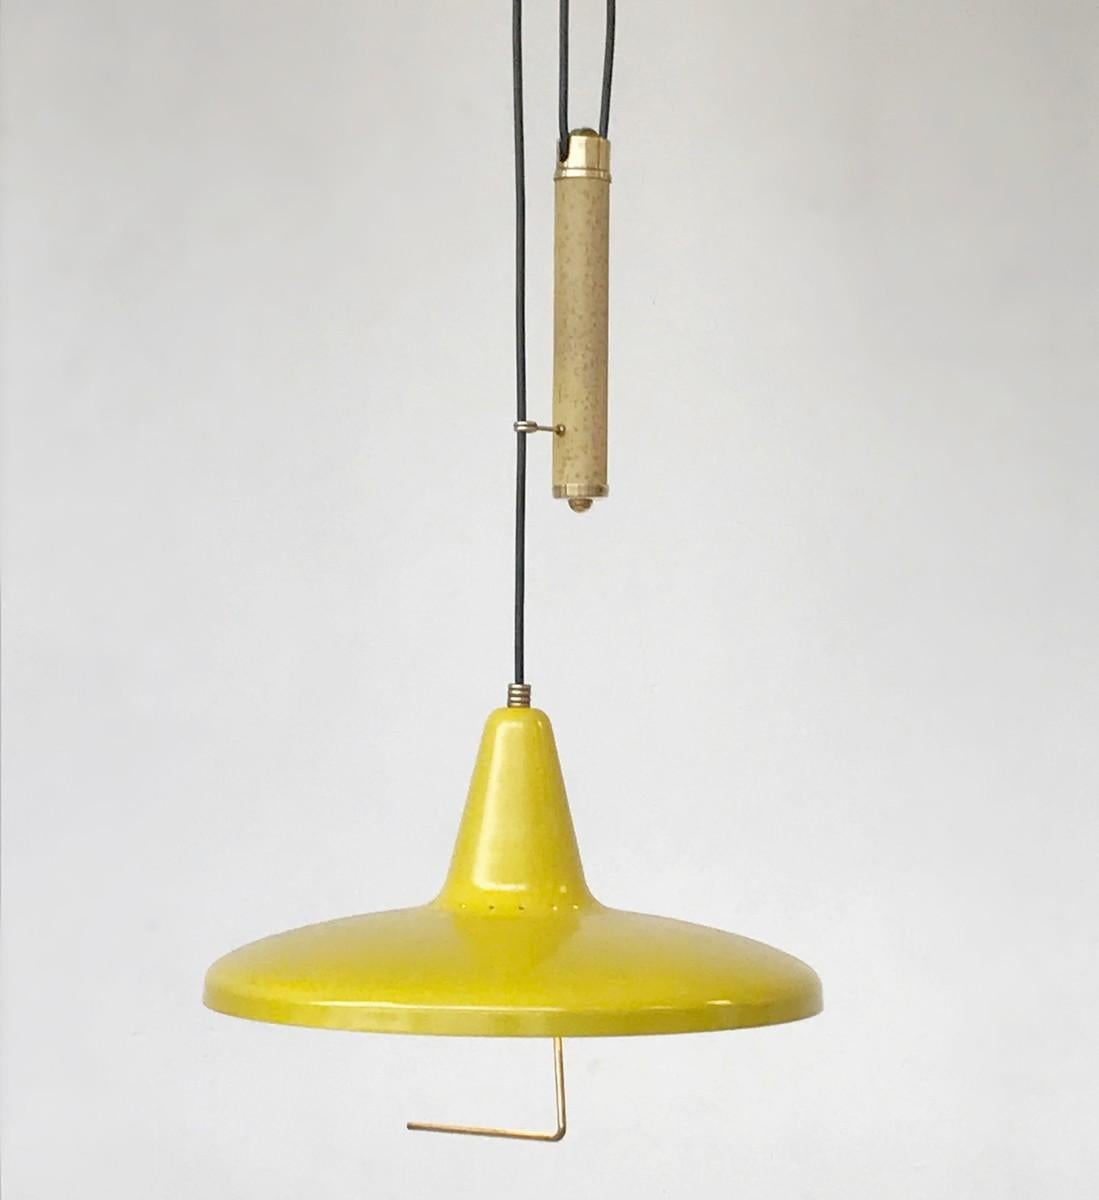 Height-adjustable pendant lamp with counter weight.